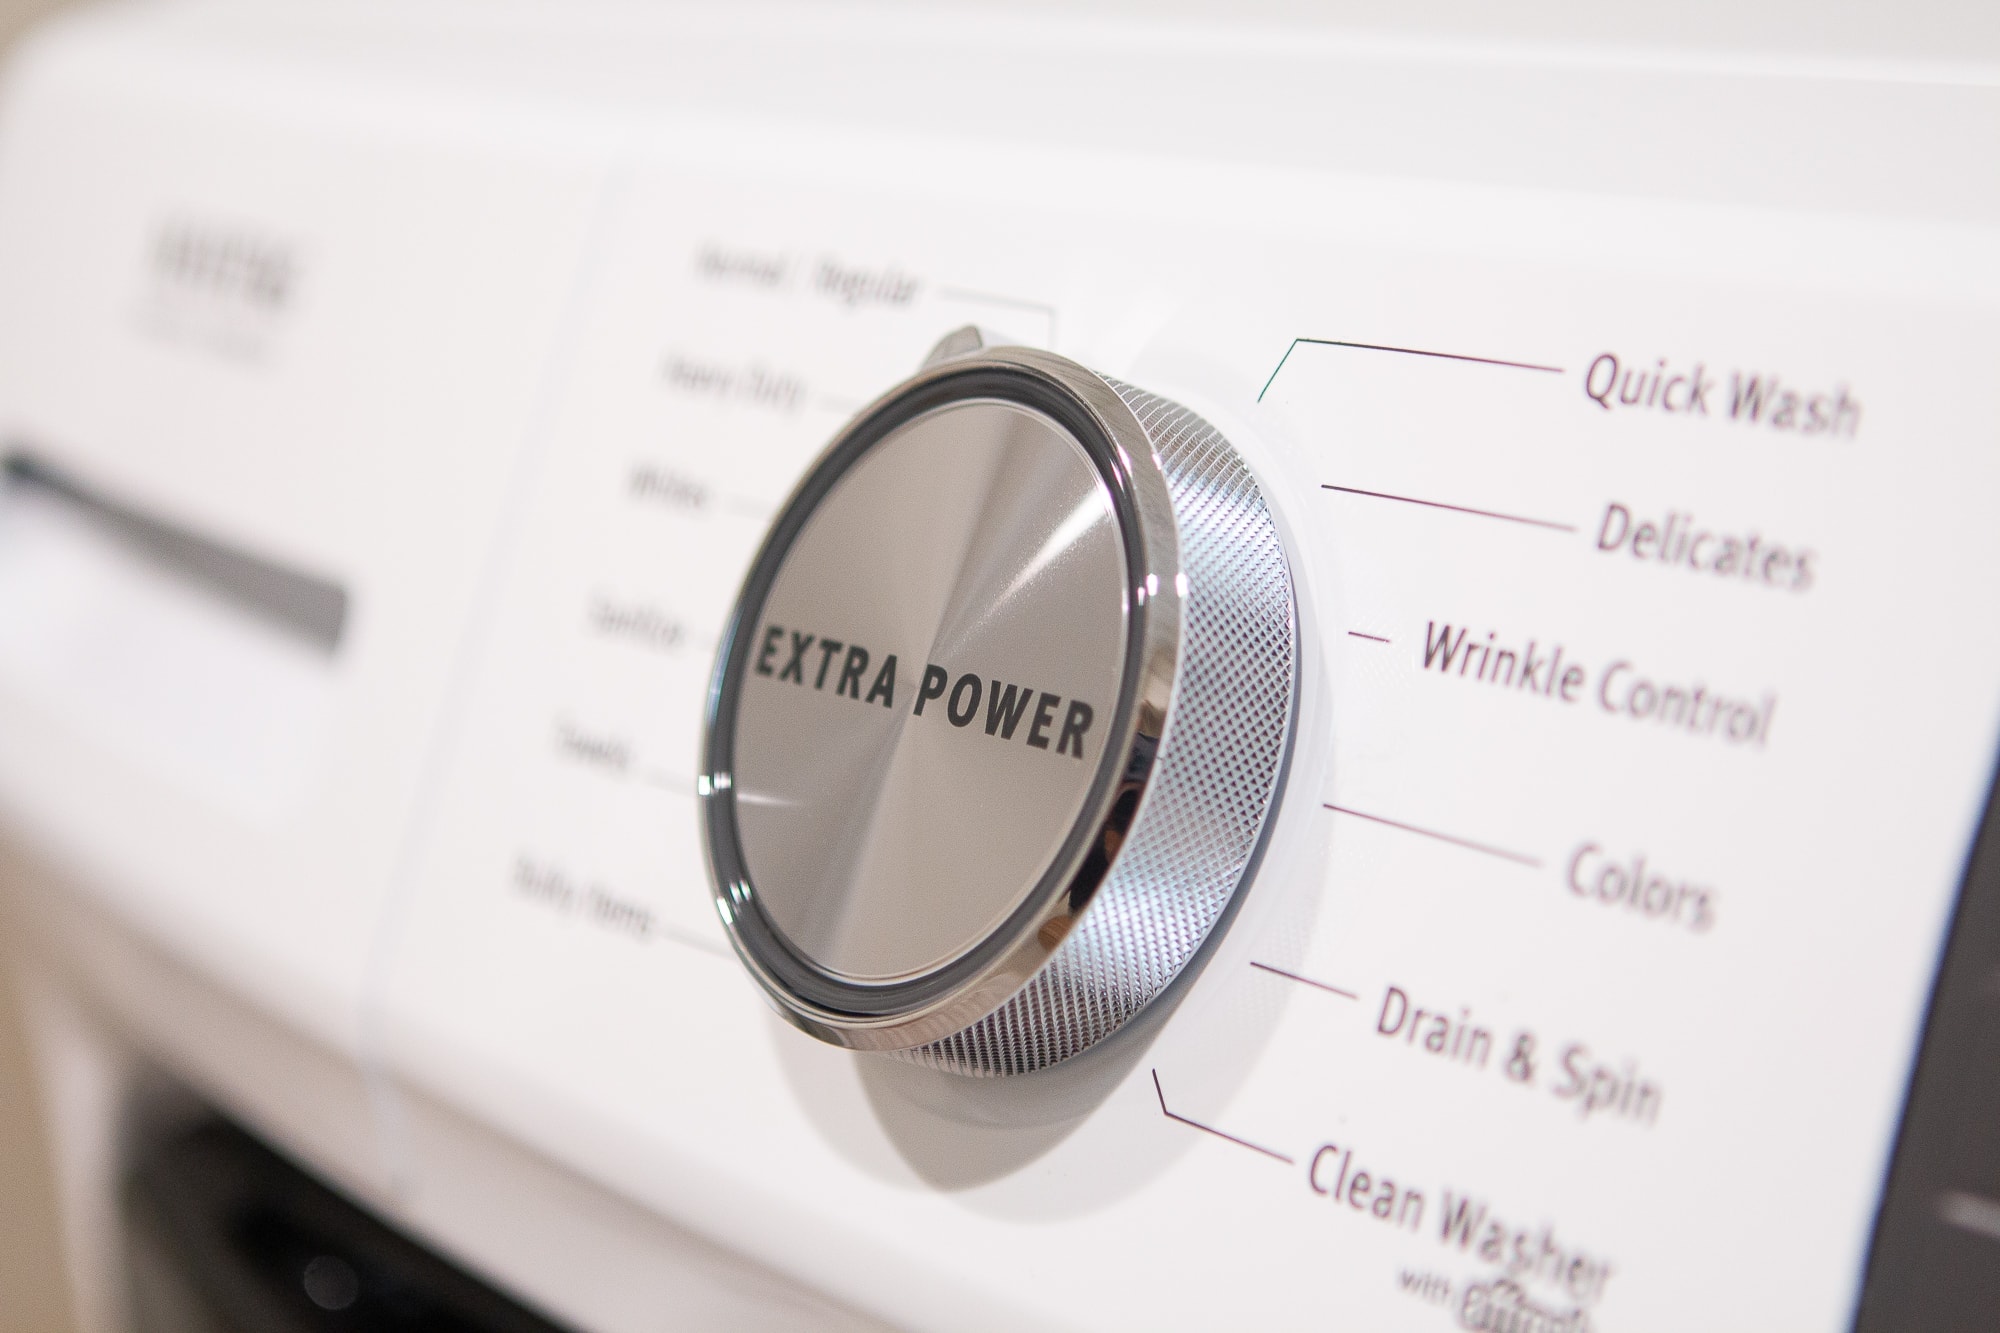 Extra power button on Maytag washer